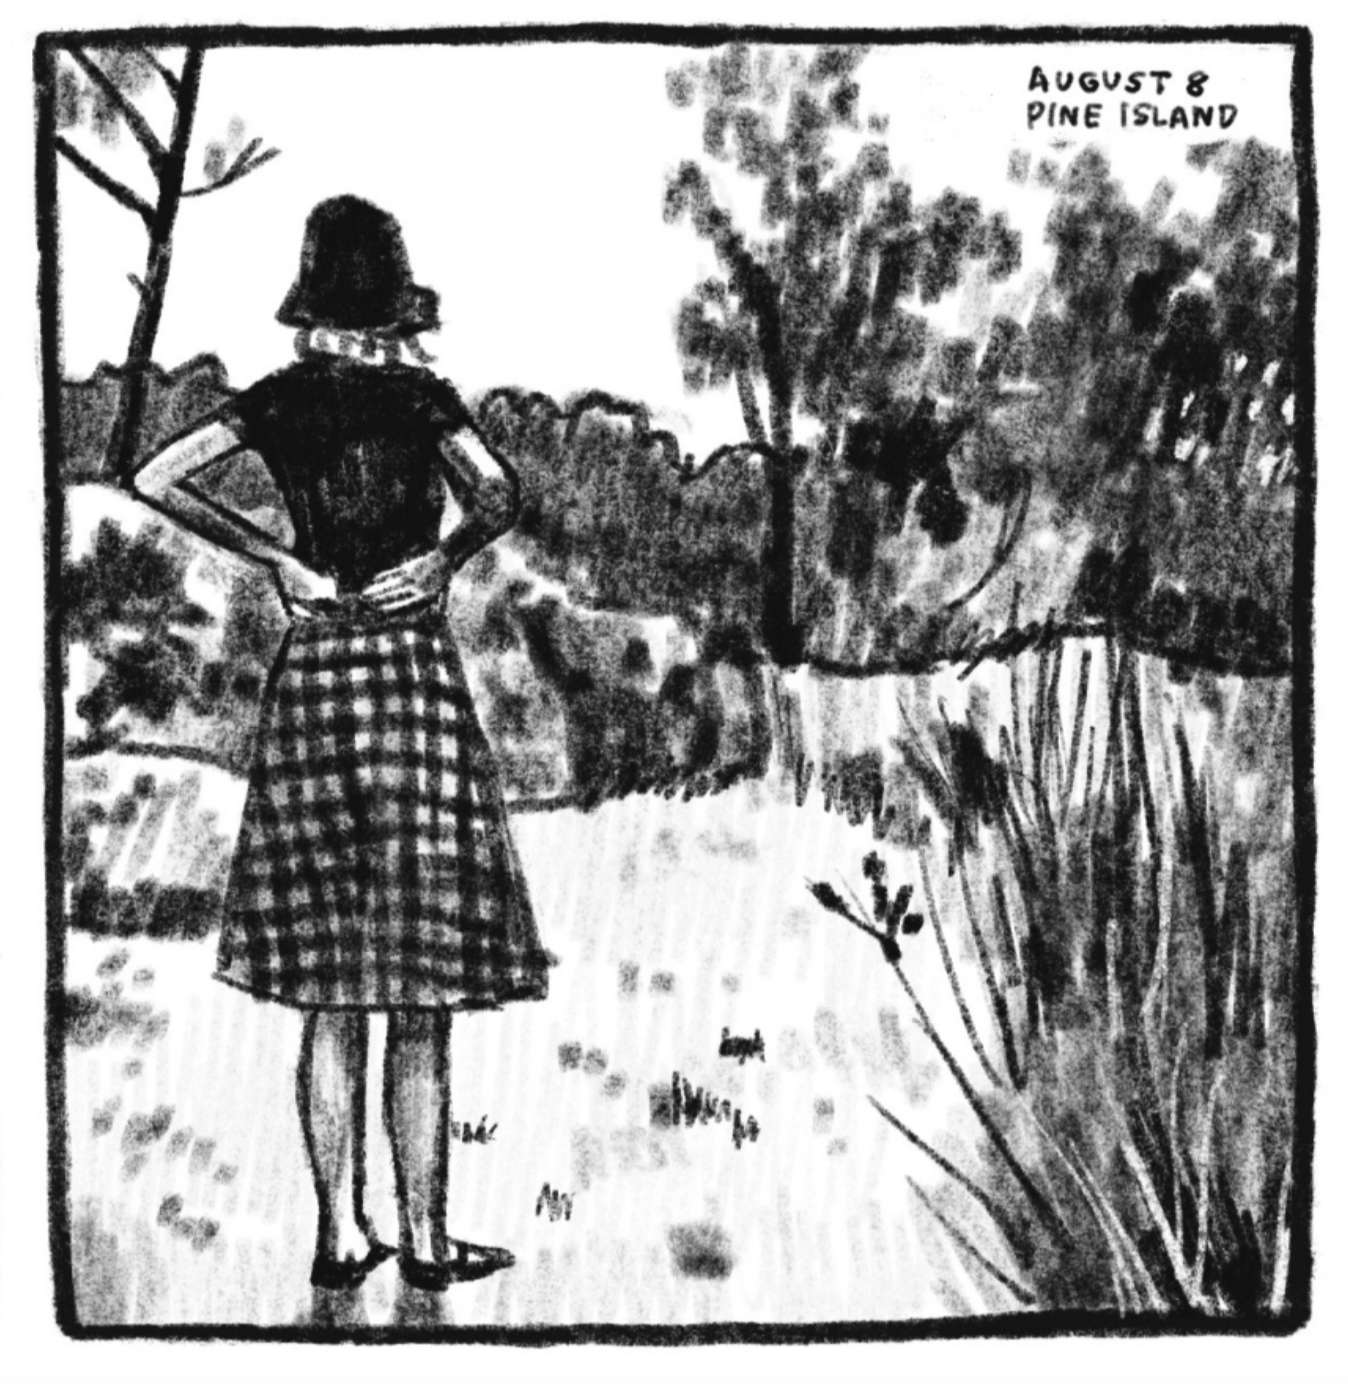 6. Kim stands outside on a patch of grass surrounded by trees, tall grasses, and other plants and shrubs. She is wearing a black bucket hat, a black short-sleeve shirt, a black-and-white checkered knee-length skirt, and black ballet flats. We see her from behind; her hands are on the backs of her hips as she looks out at the scene before her. â€œAugust 8. Pine Island.â€